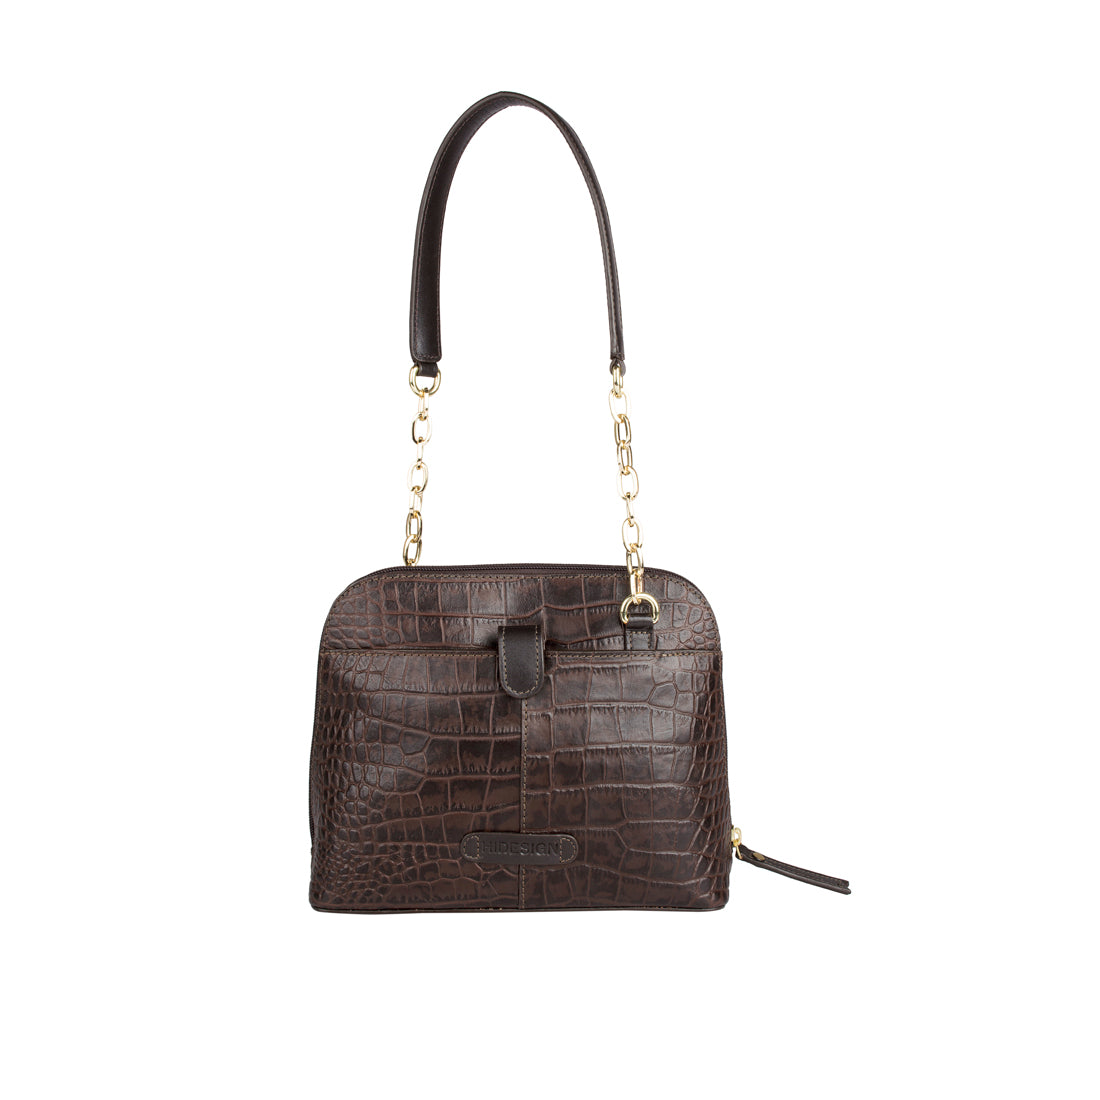 Hidesign Bags & Handbags outlet - Women - 1800 products on sale